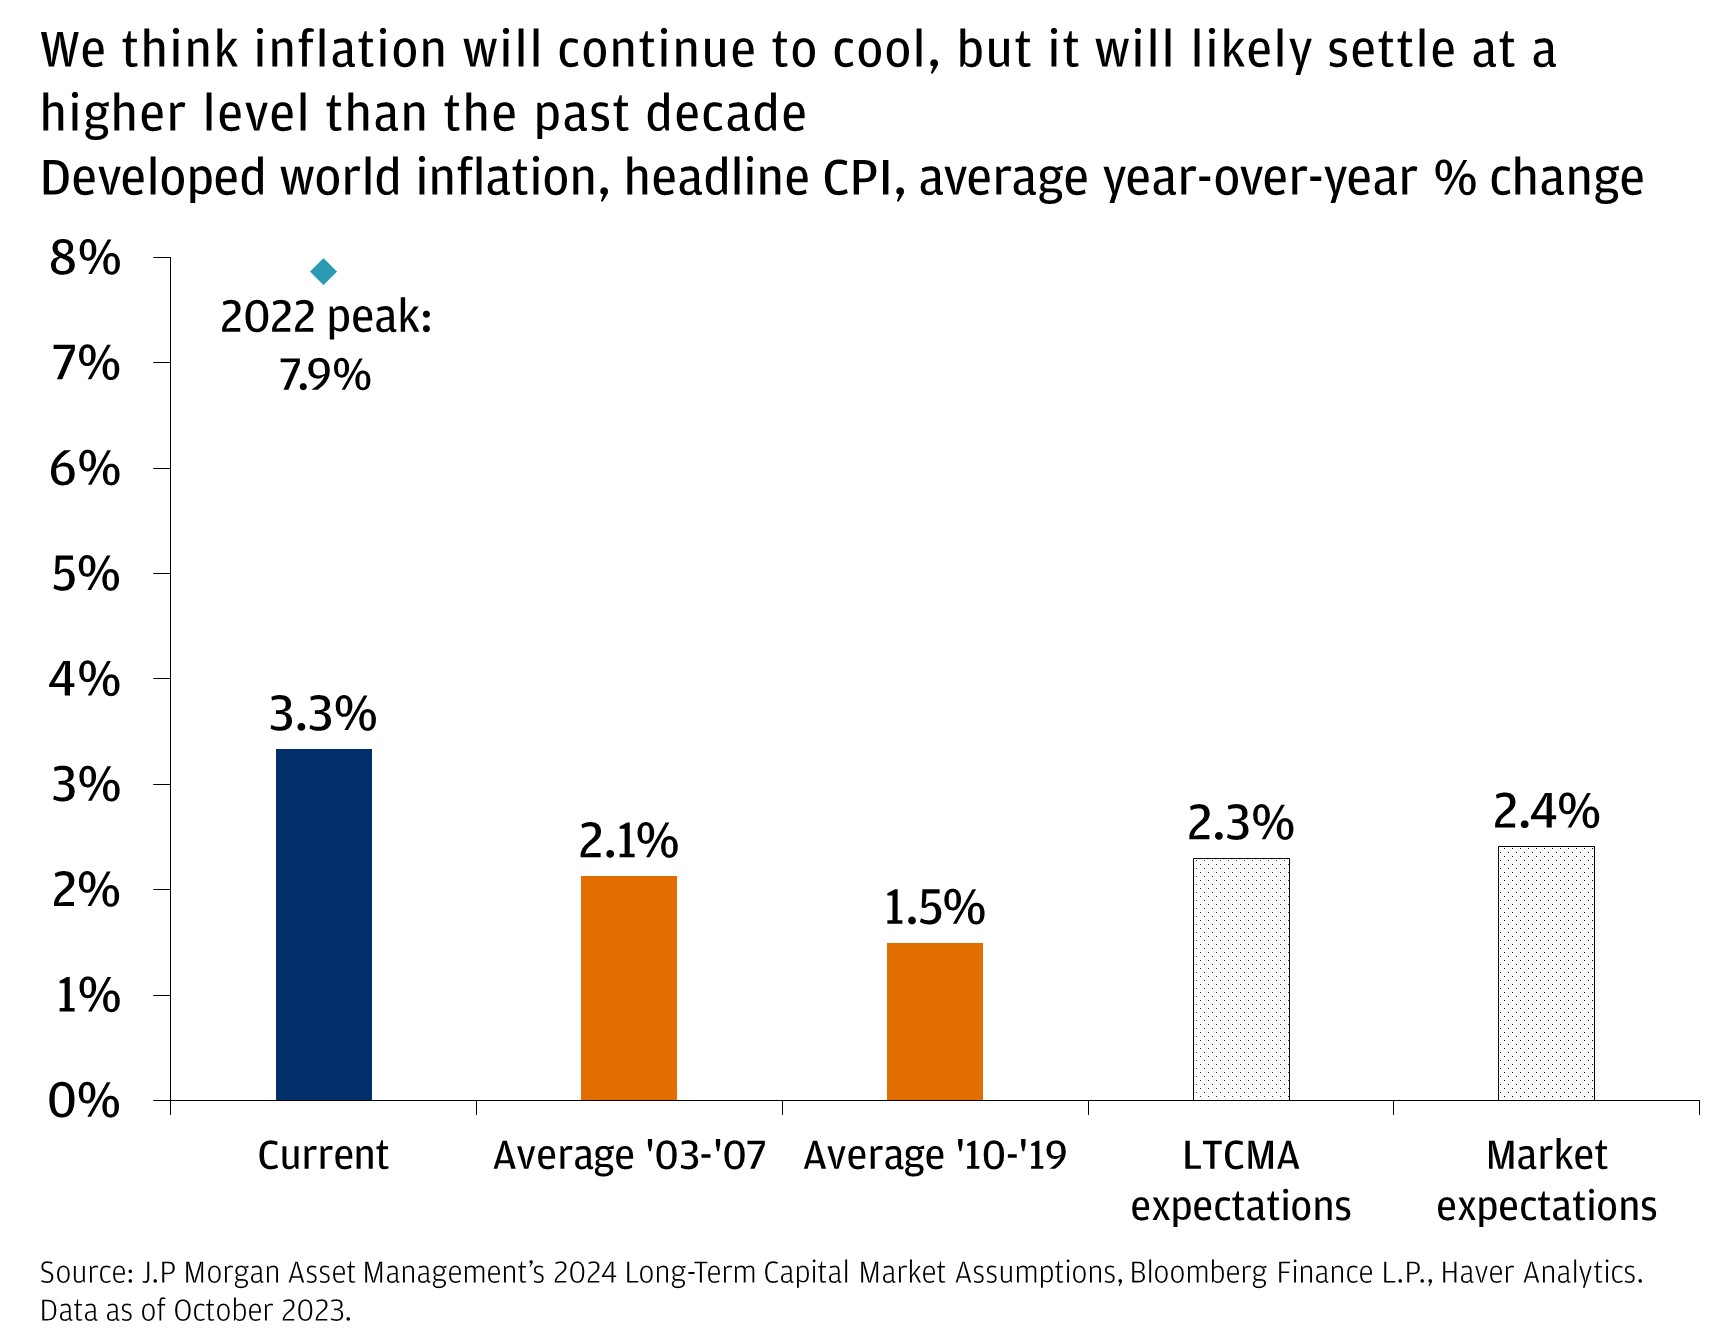 We think inflation will continue to cool, but it will likely settle at a higher level than the past decade